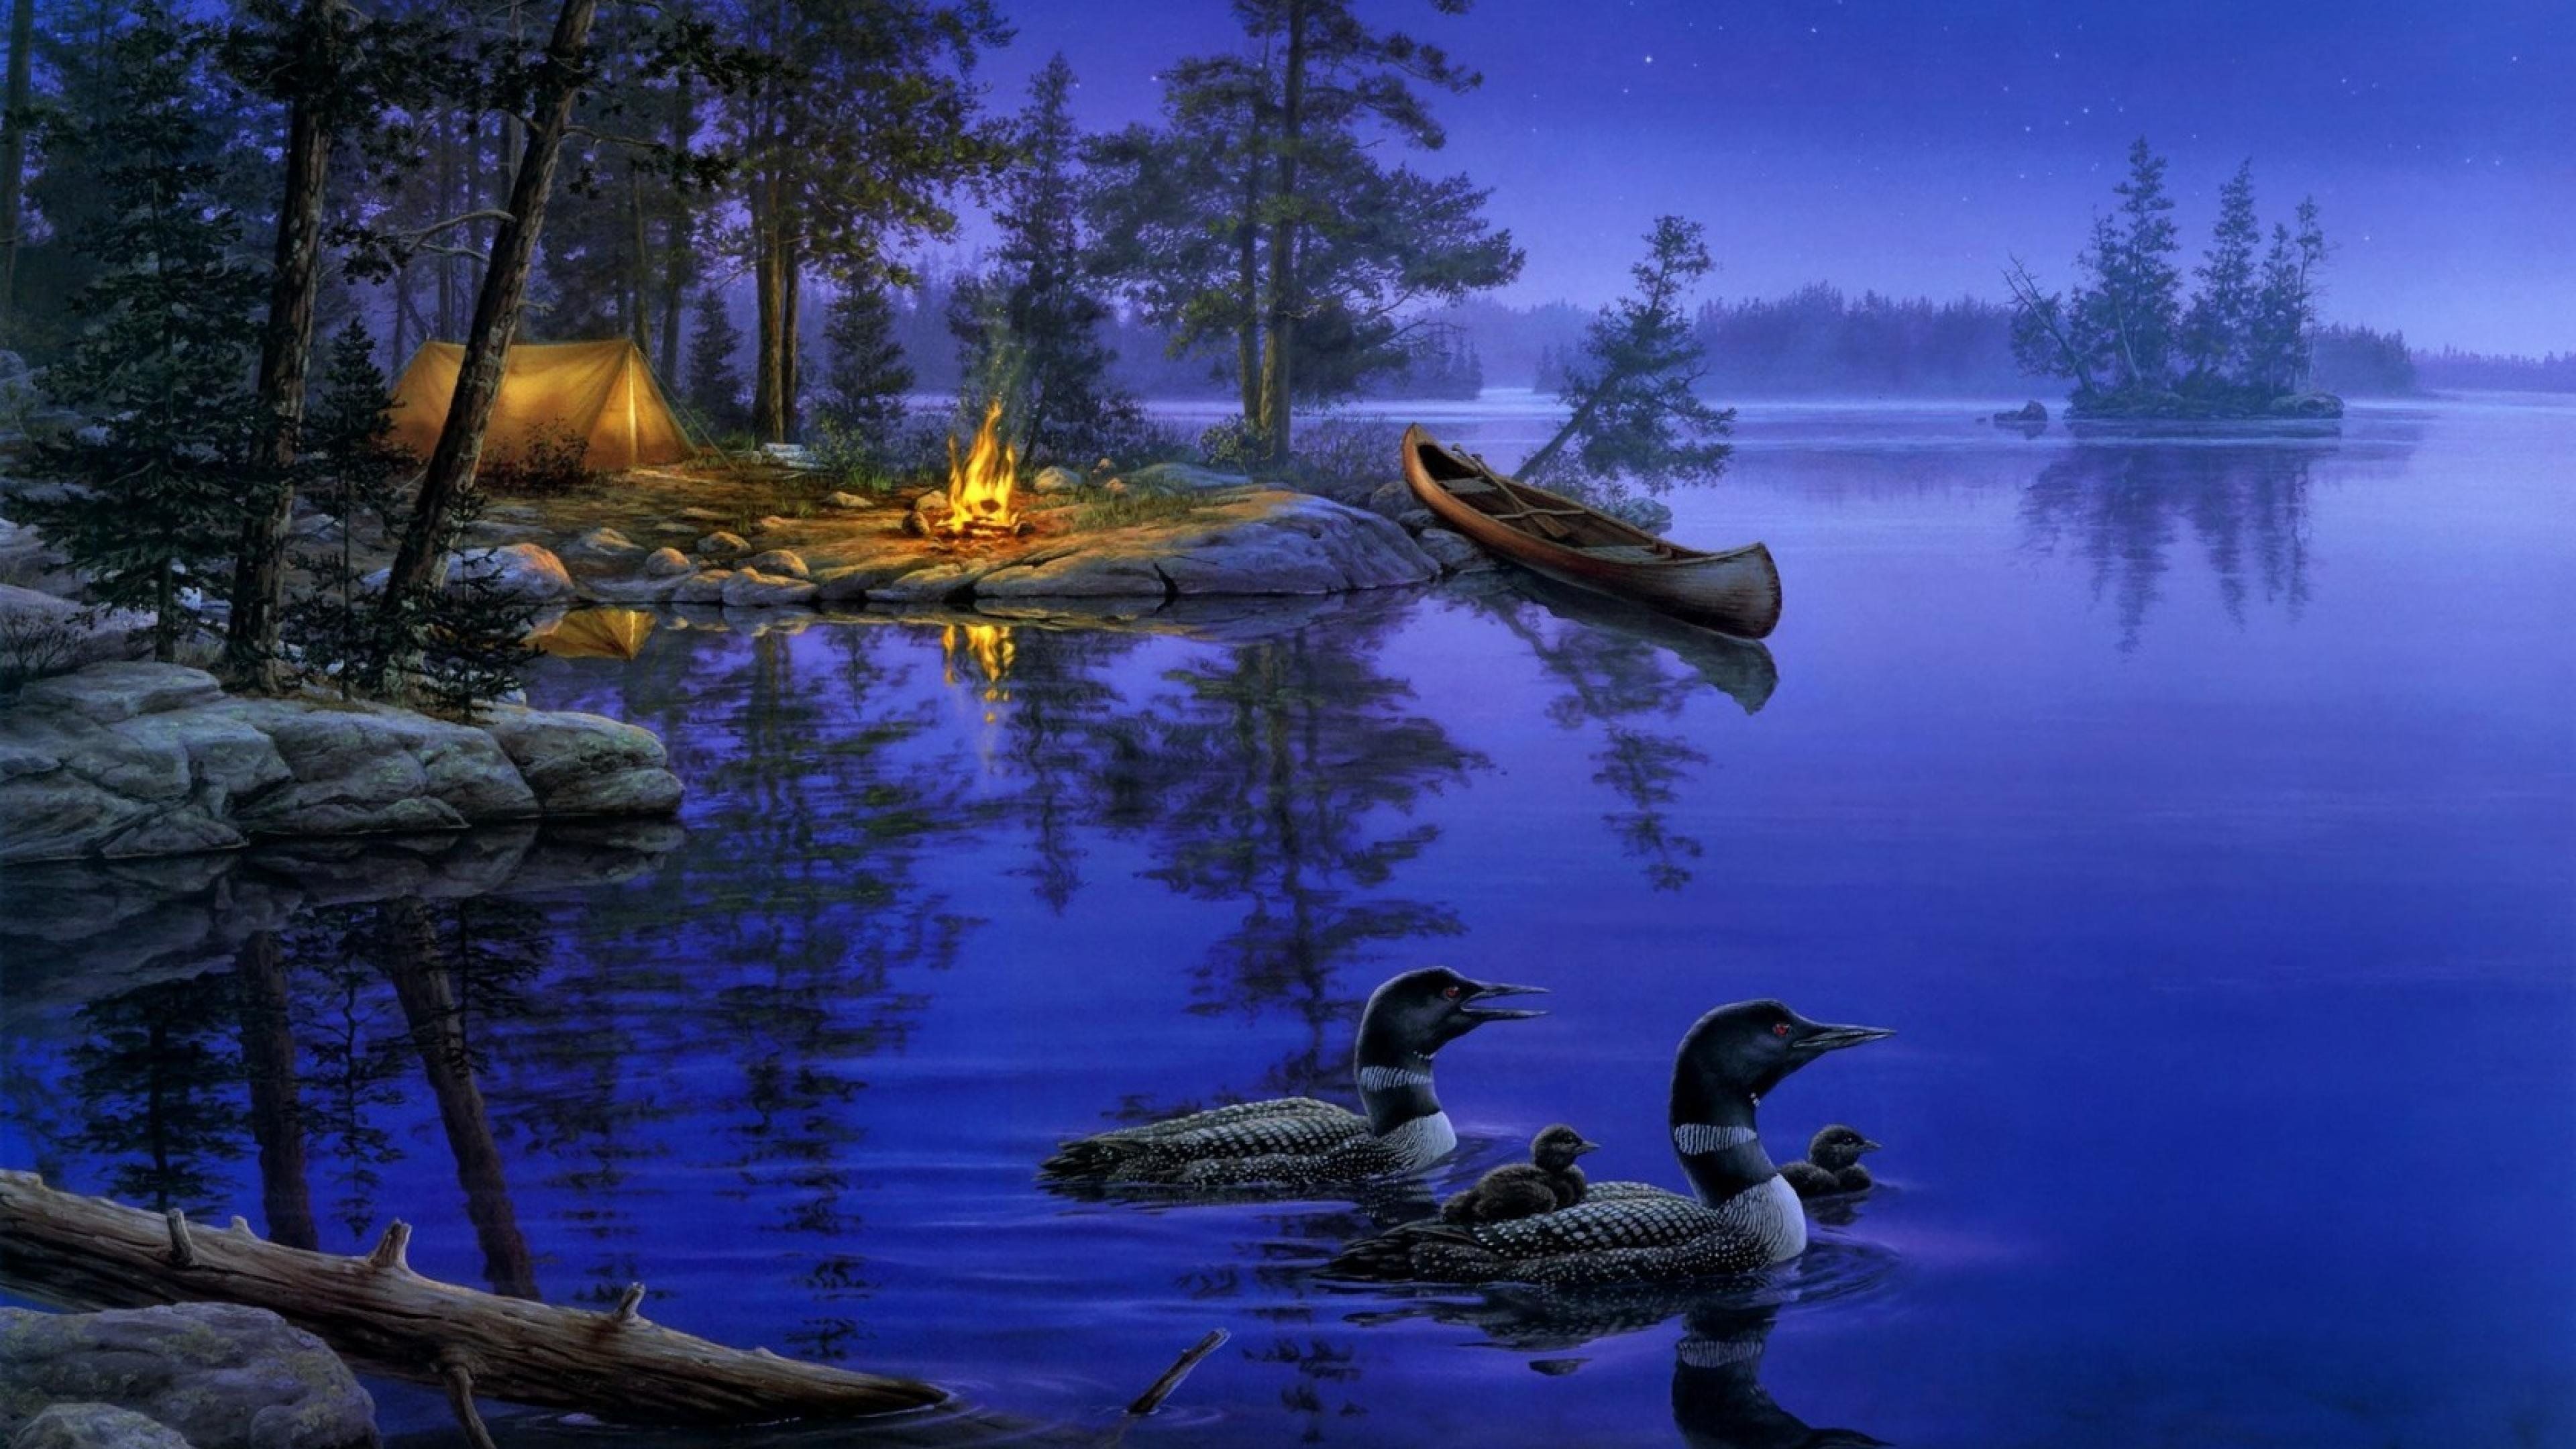 A painting of some ducks on the water - Duck